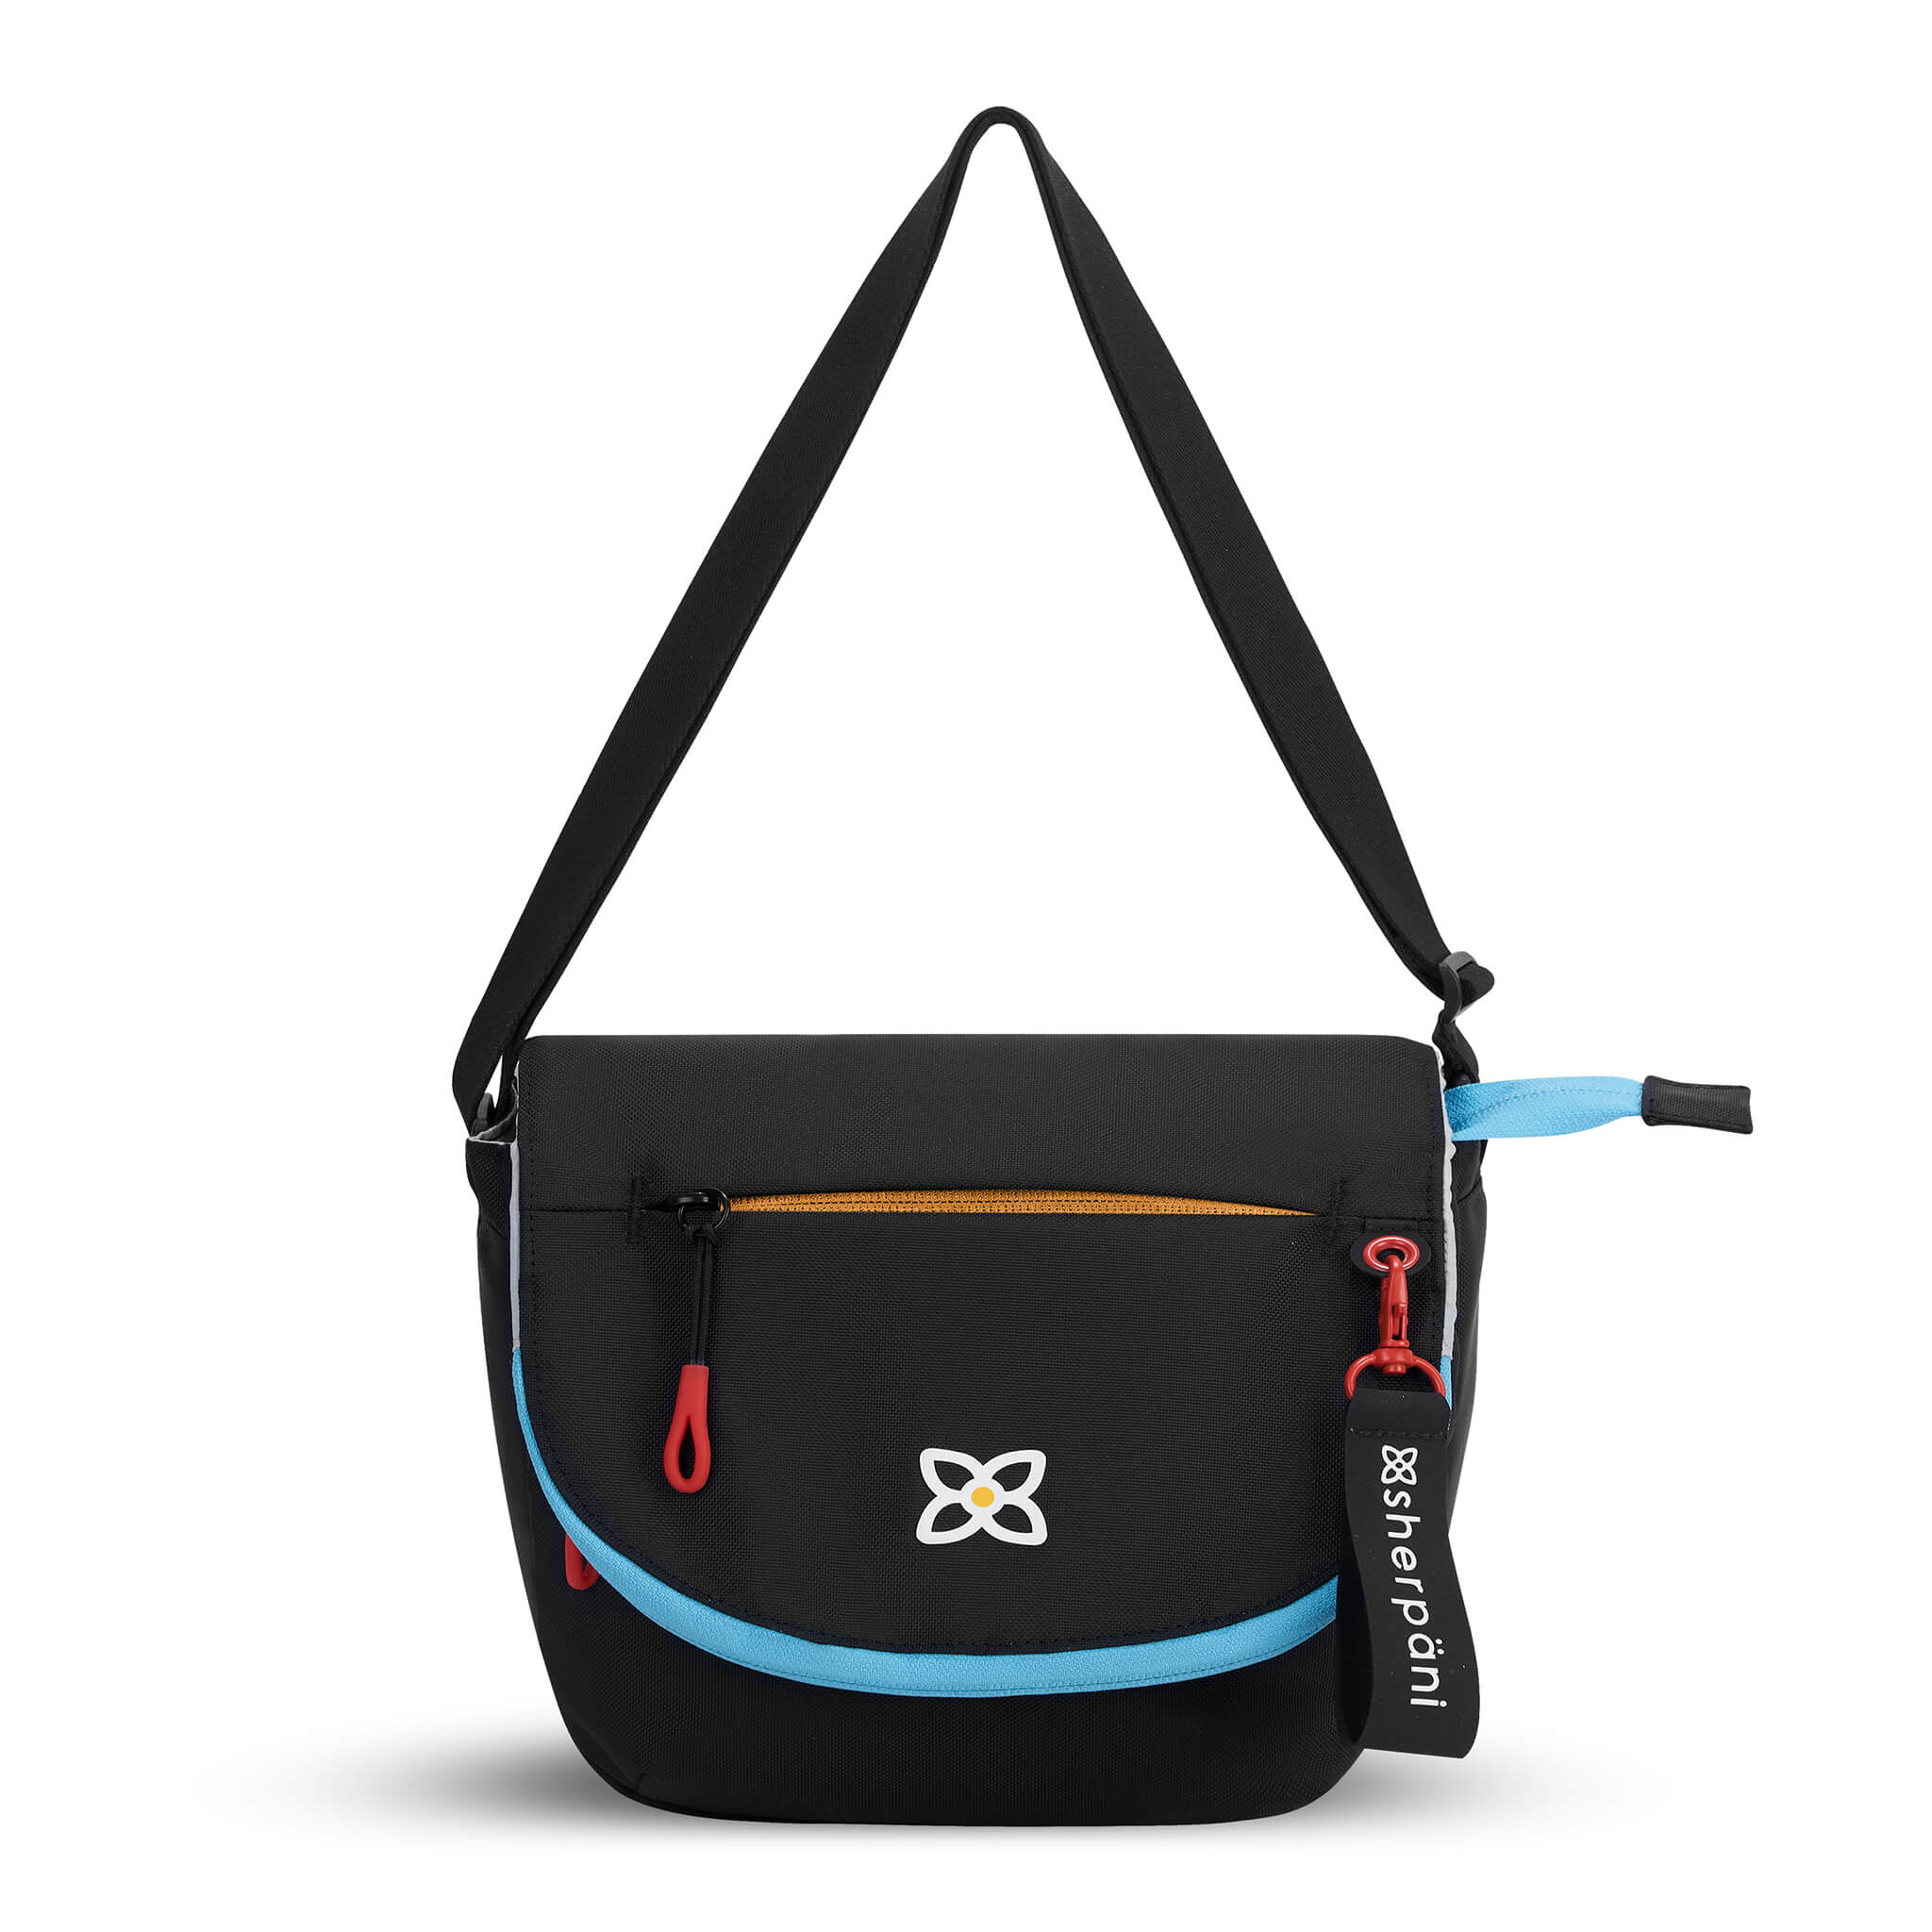 Flat front view of Sherpani messenger satchel bag, the Milli in Chromatic. Milli features include an adjustable crossbody strap, front zipper pocket, brimmed zipper pocket, detachable keychain, magnetic closure, RFID security and multiple internal pockets for organization. The Chromatic color is mostly black with pops of color in yellow, red and blue. 